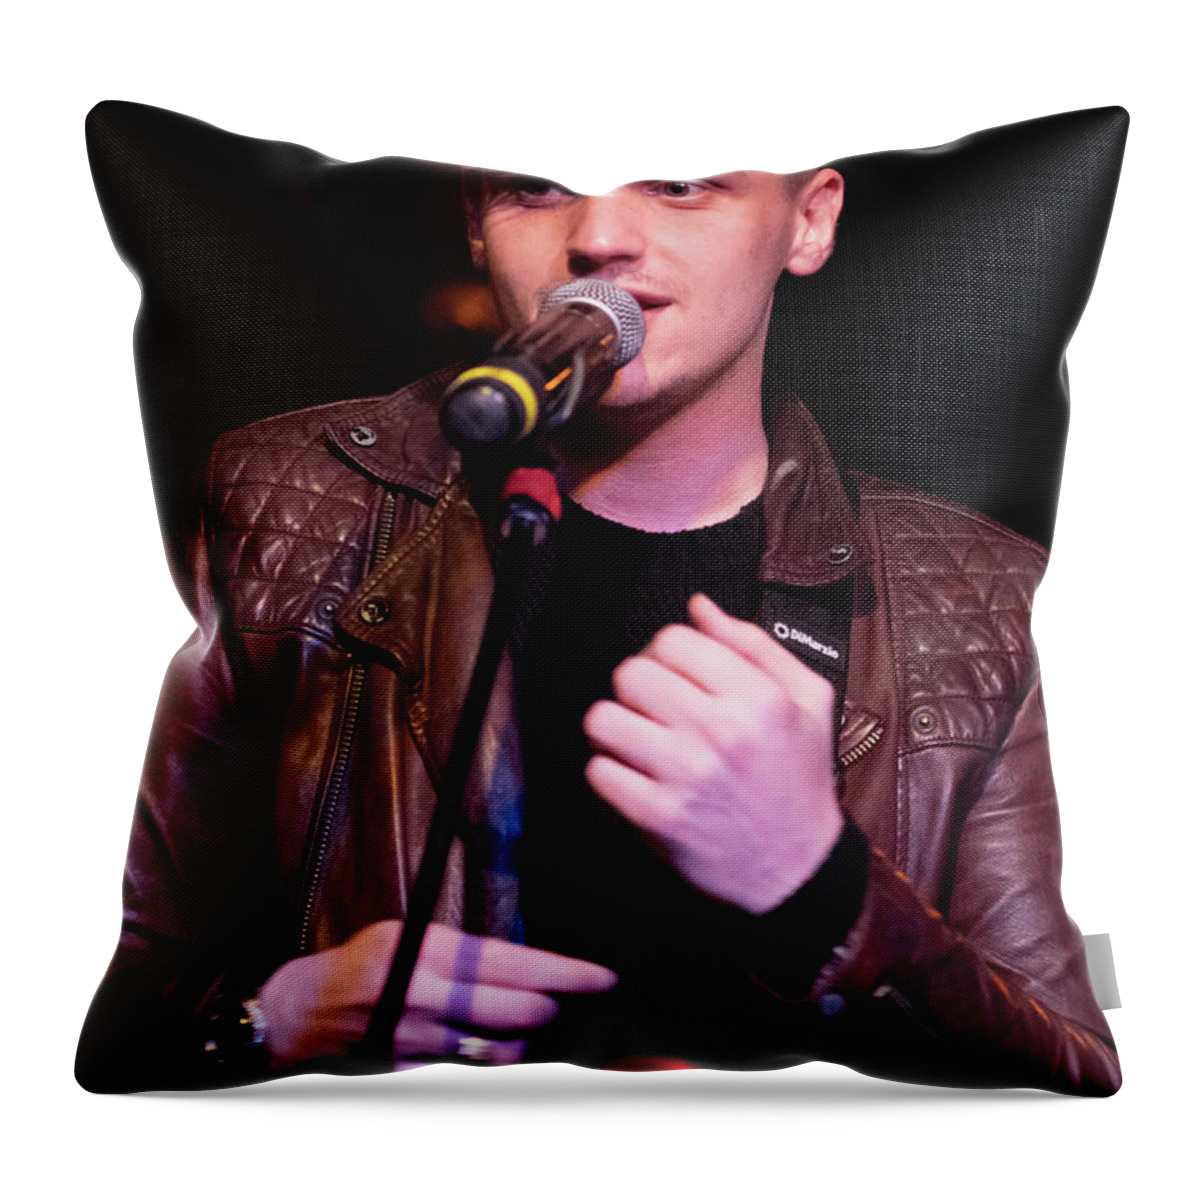 Patrick Droney Throw Pillow featuring the digital art Patrick Droney by Christopher Cutter